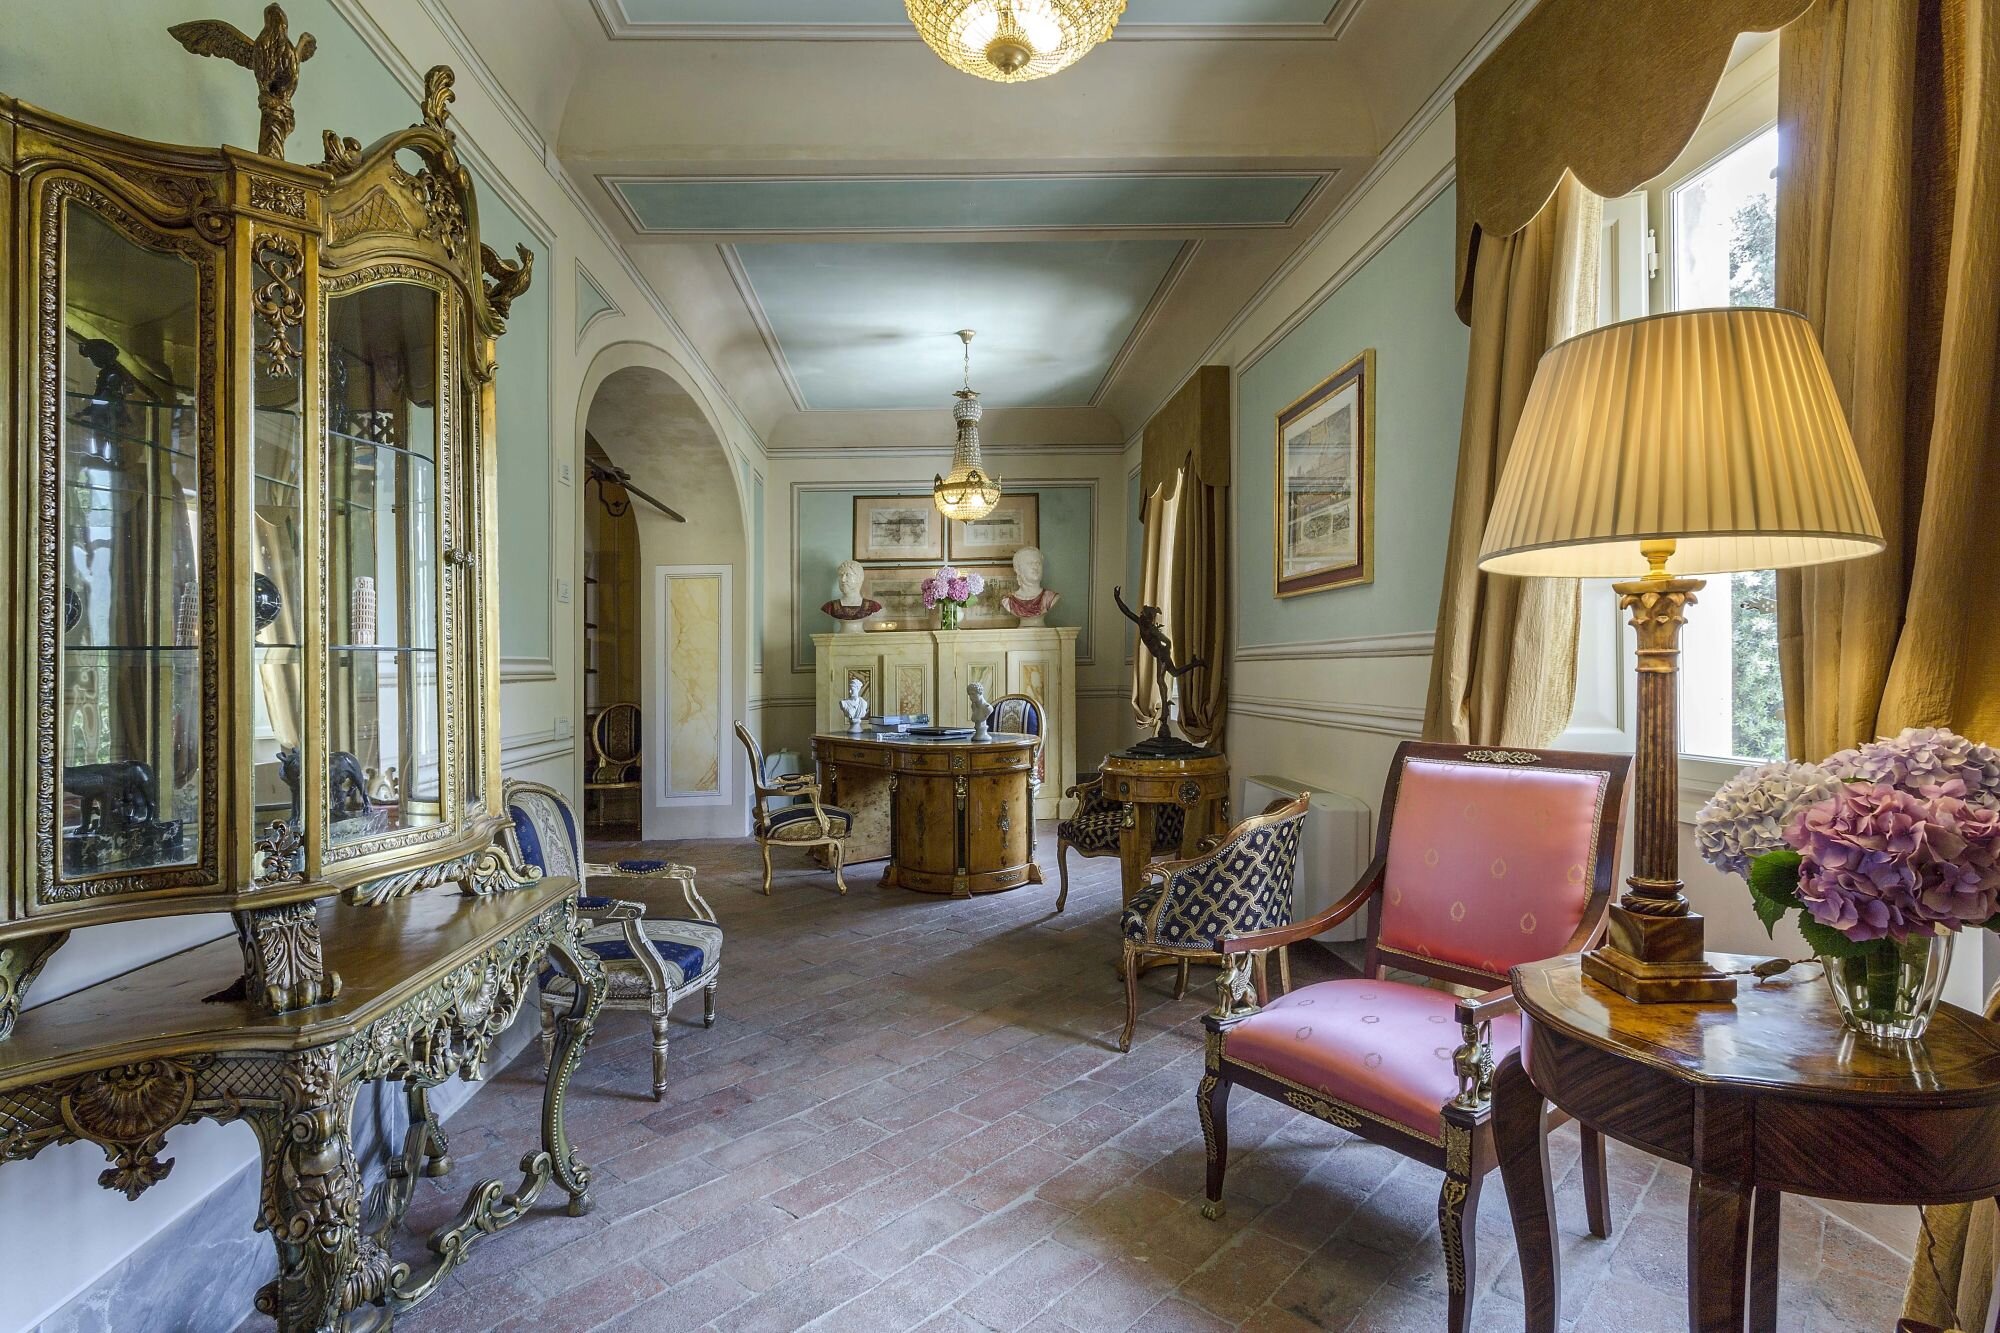 Francis York A Portfolio of Luxury Tuscan Villa Rentals is Coming to Auction21.jpeg